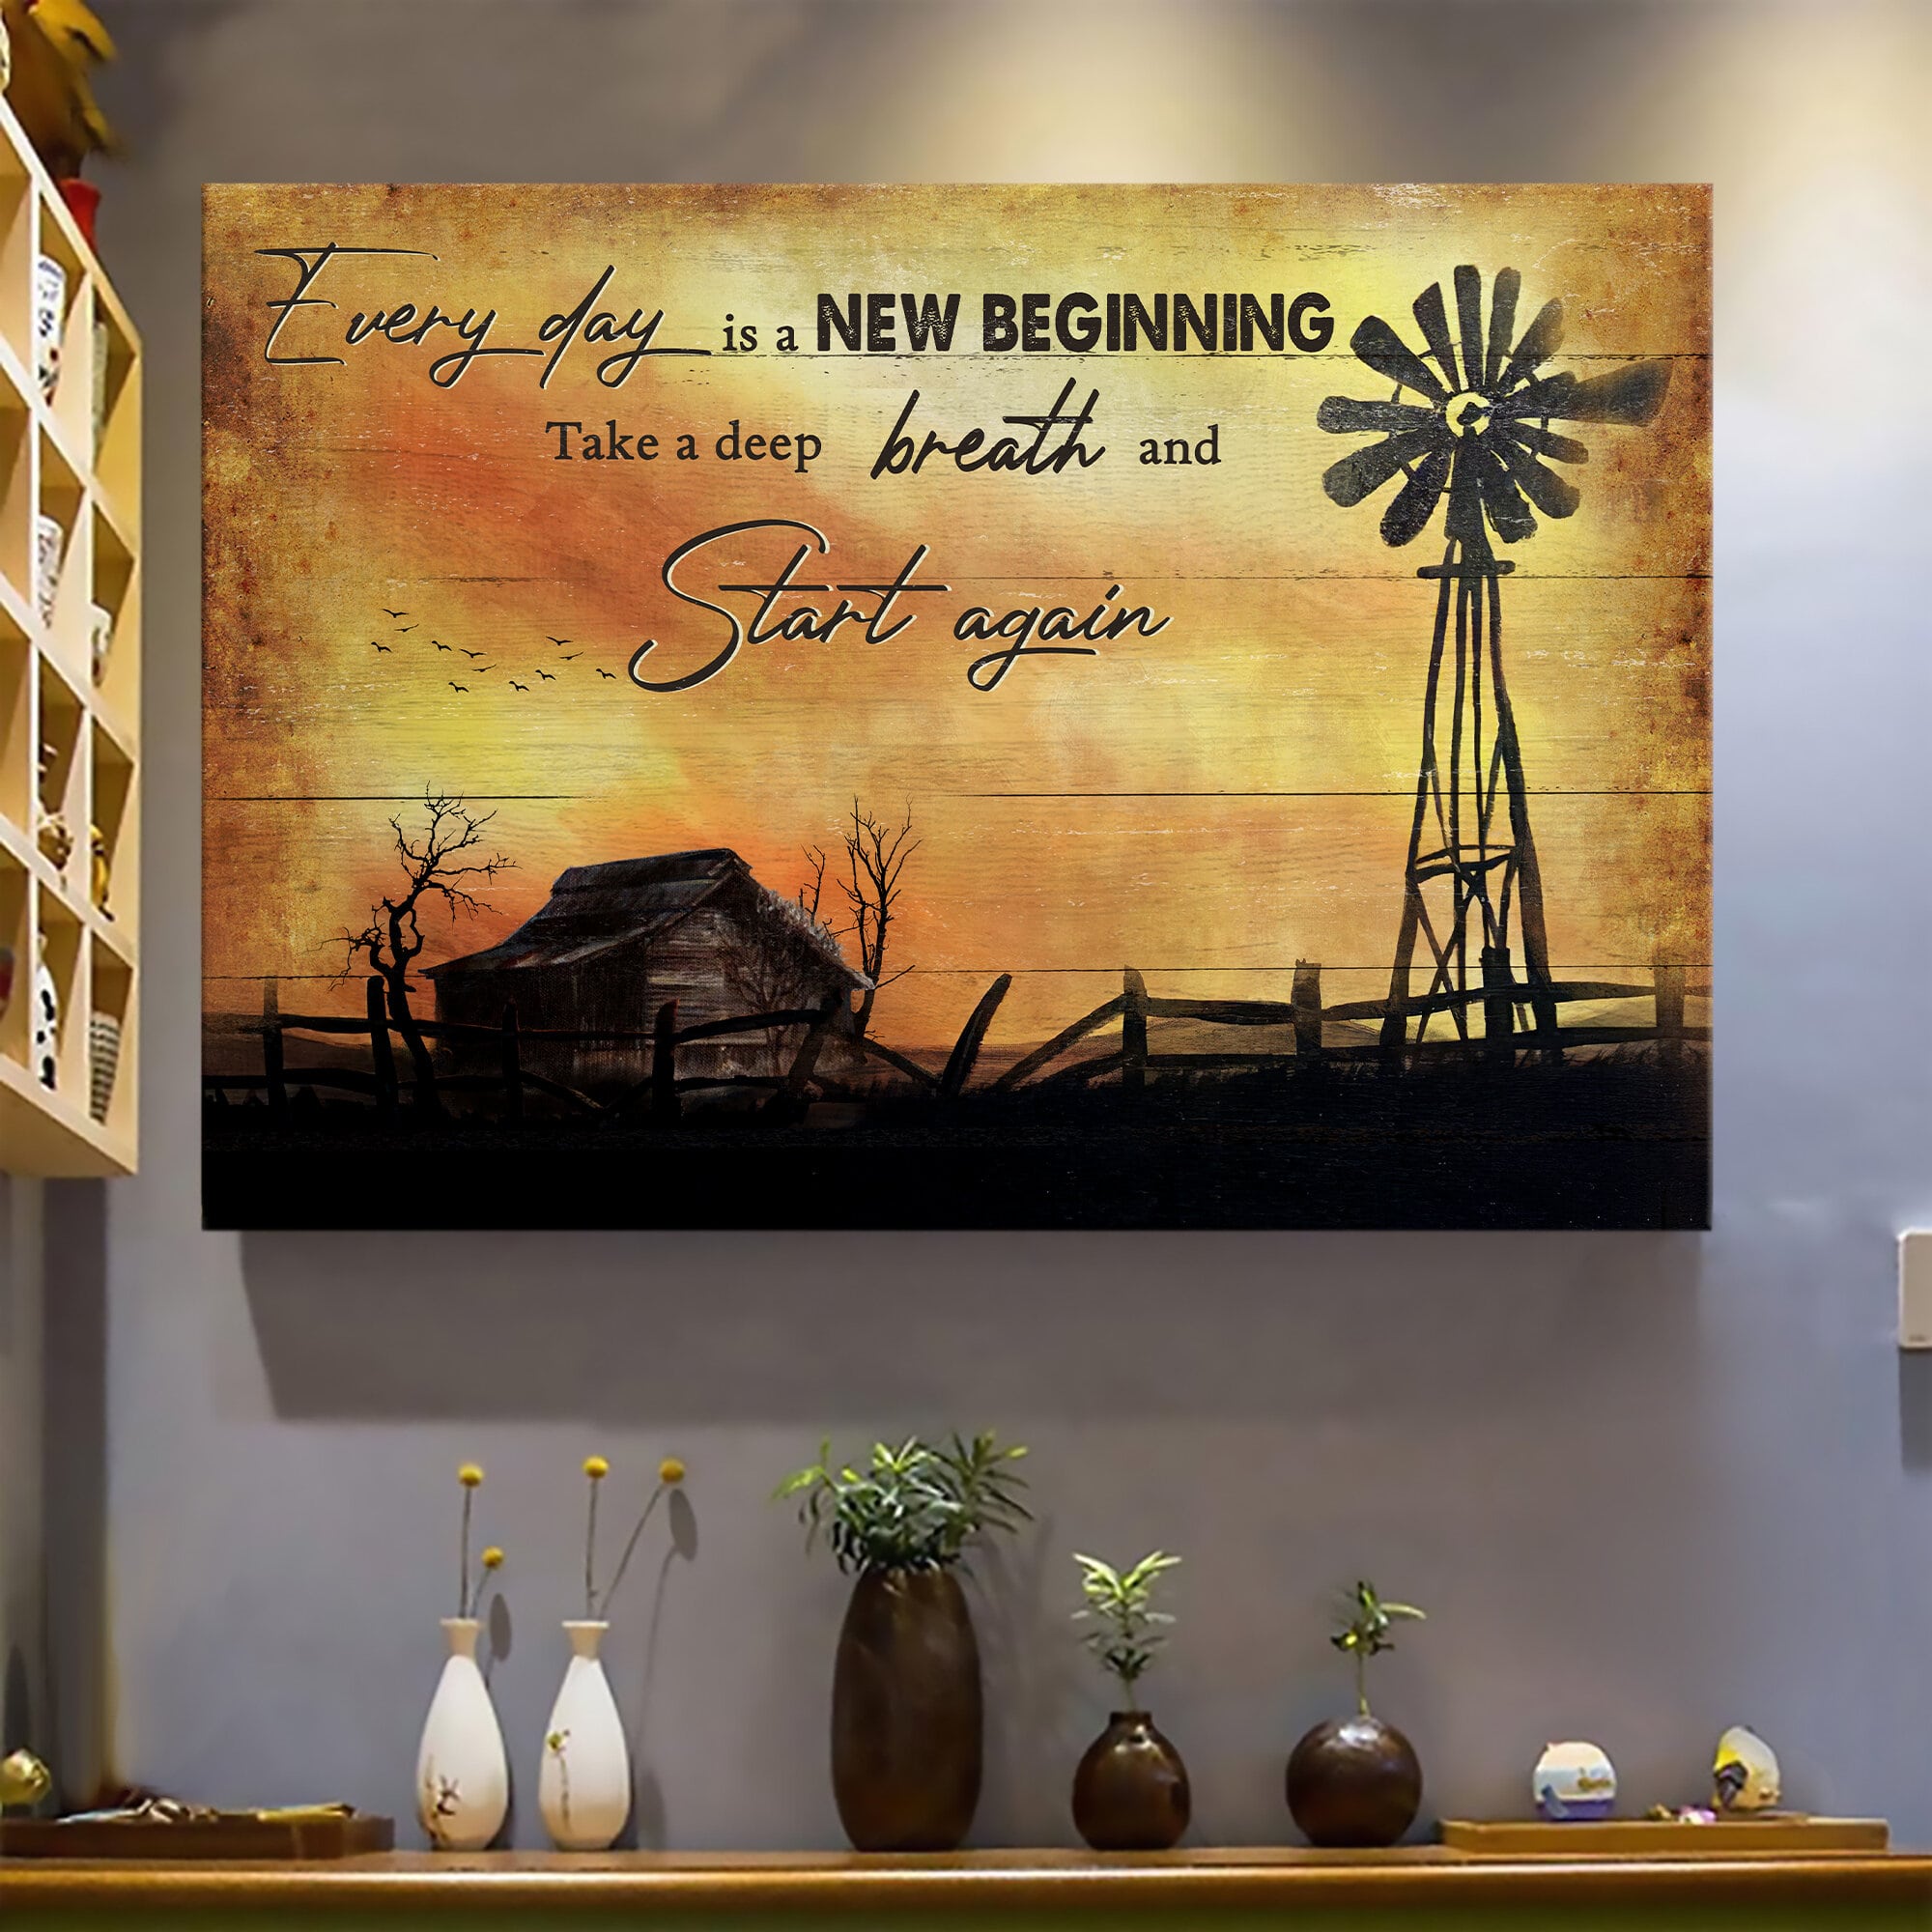 Old Barn Painting, Windmill, Sunset Landscape, Everyday is a new beginning - Jesus Landscape Canvas Prints, Wall Art